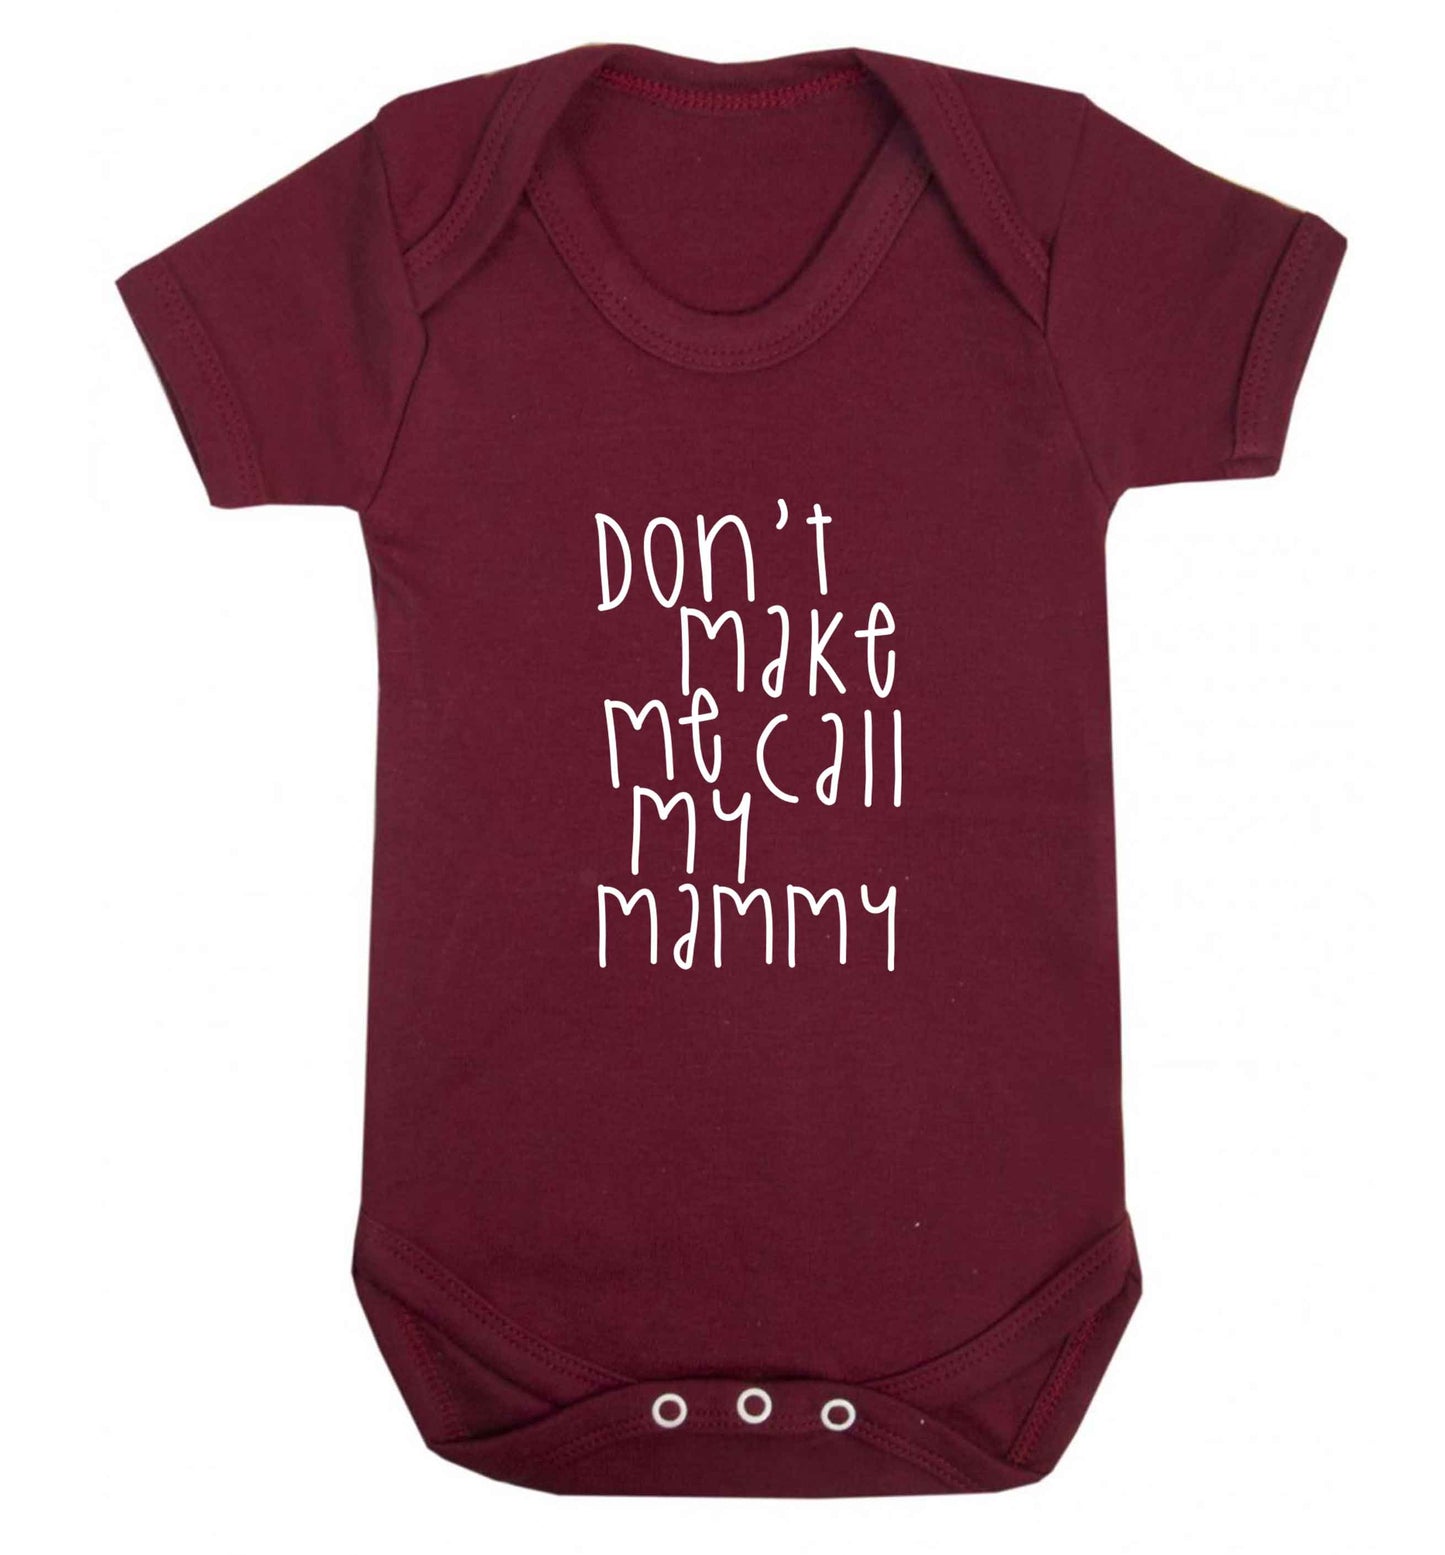 Don't make me call my mammy baby vest maroon 18-24 months